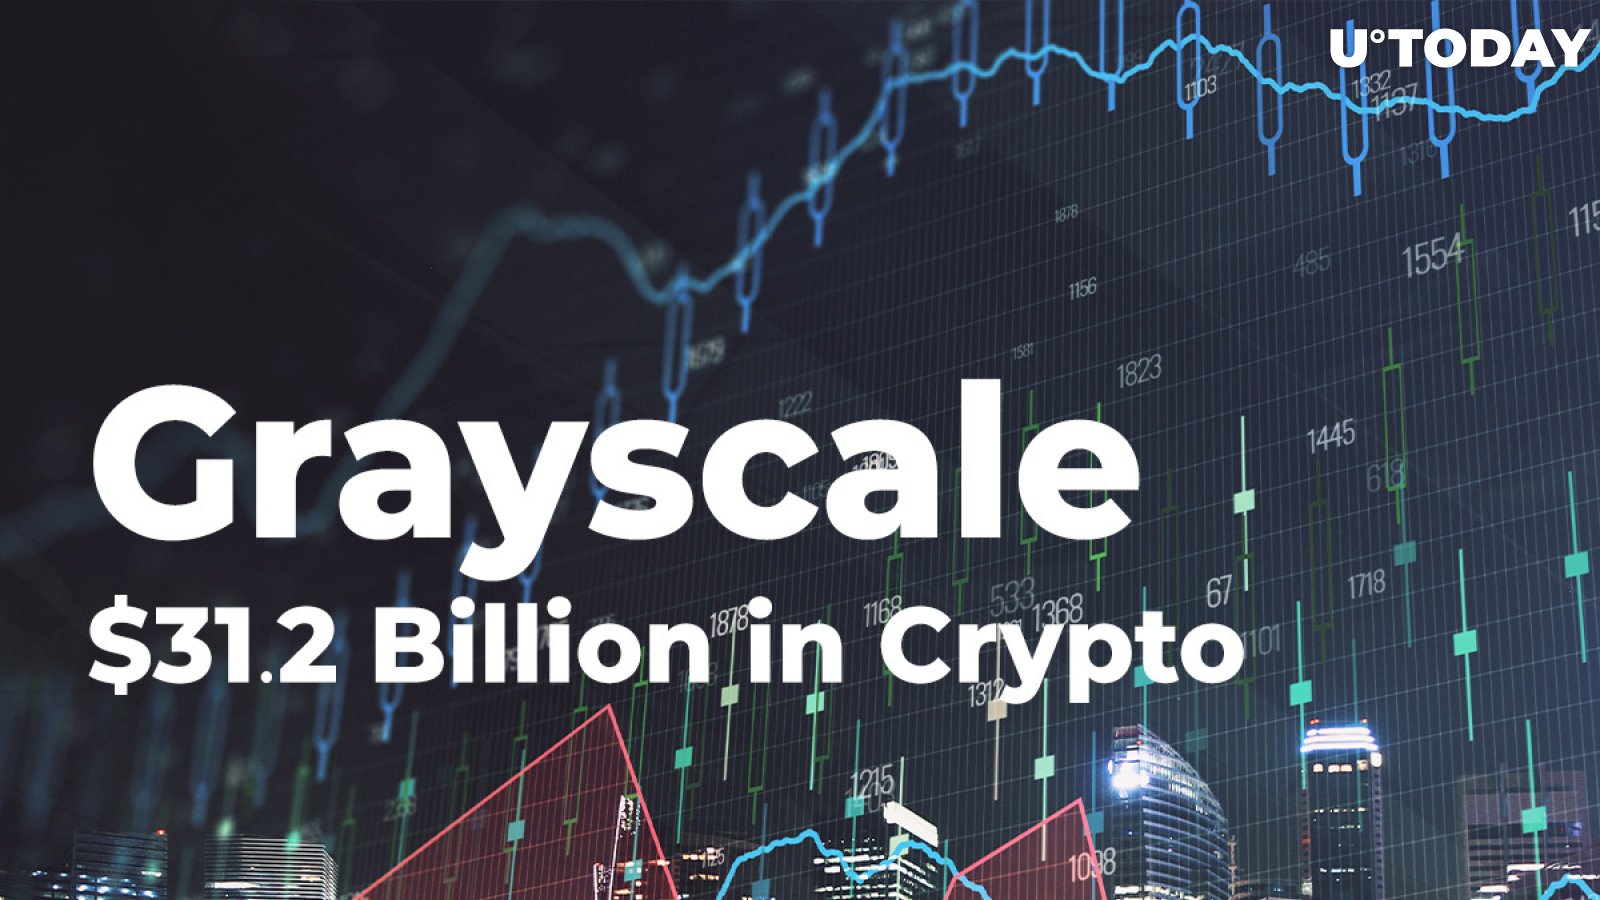 Grayscale Sees Growing Inflows in Its Altcoin Trusts, Now Holding $31.2 Billion in Crypto